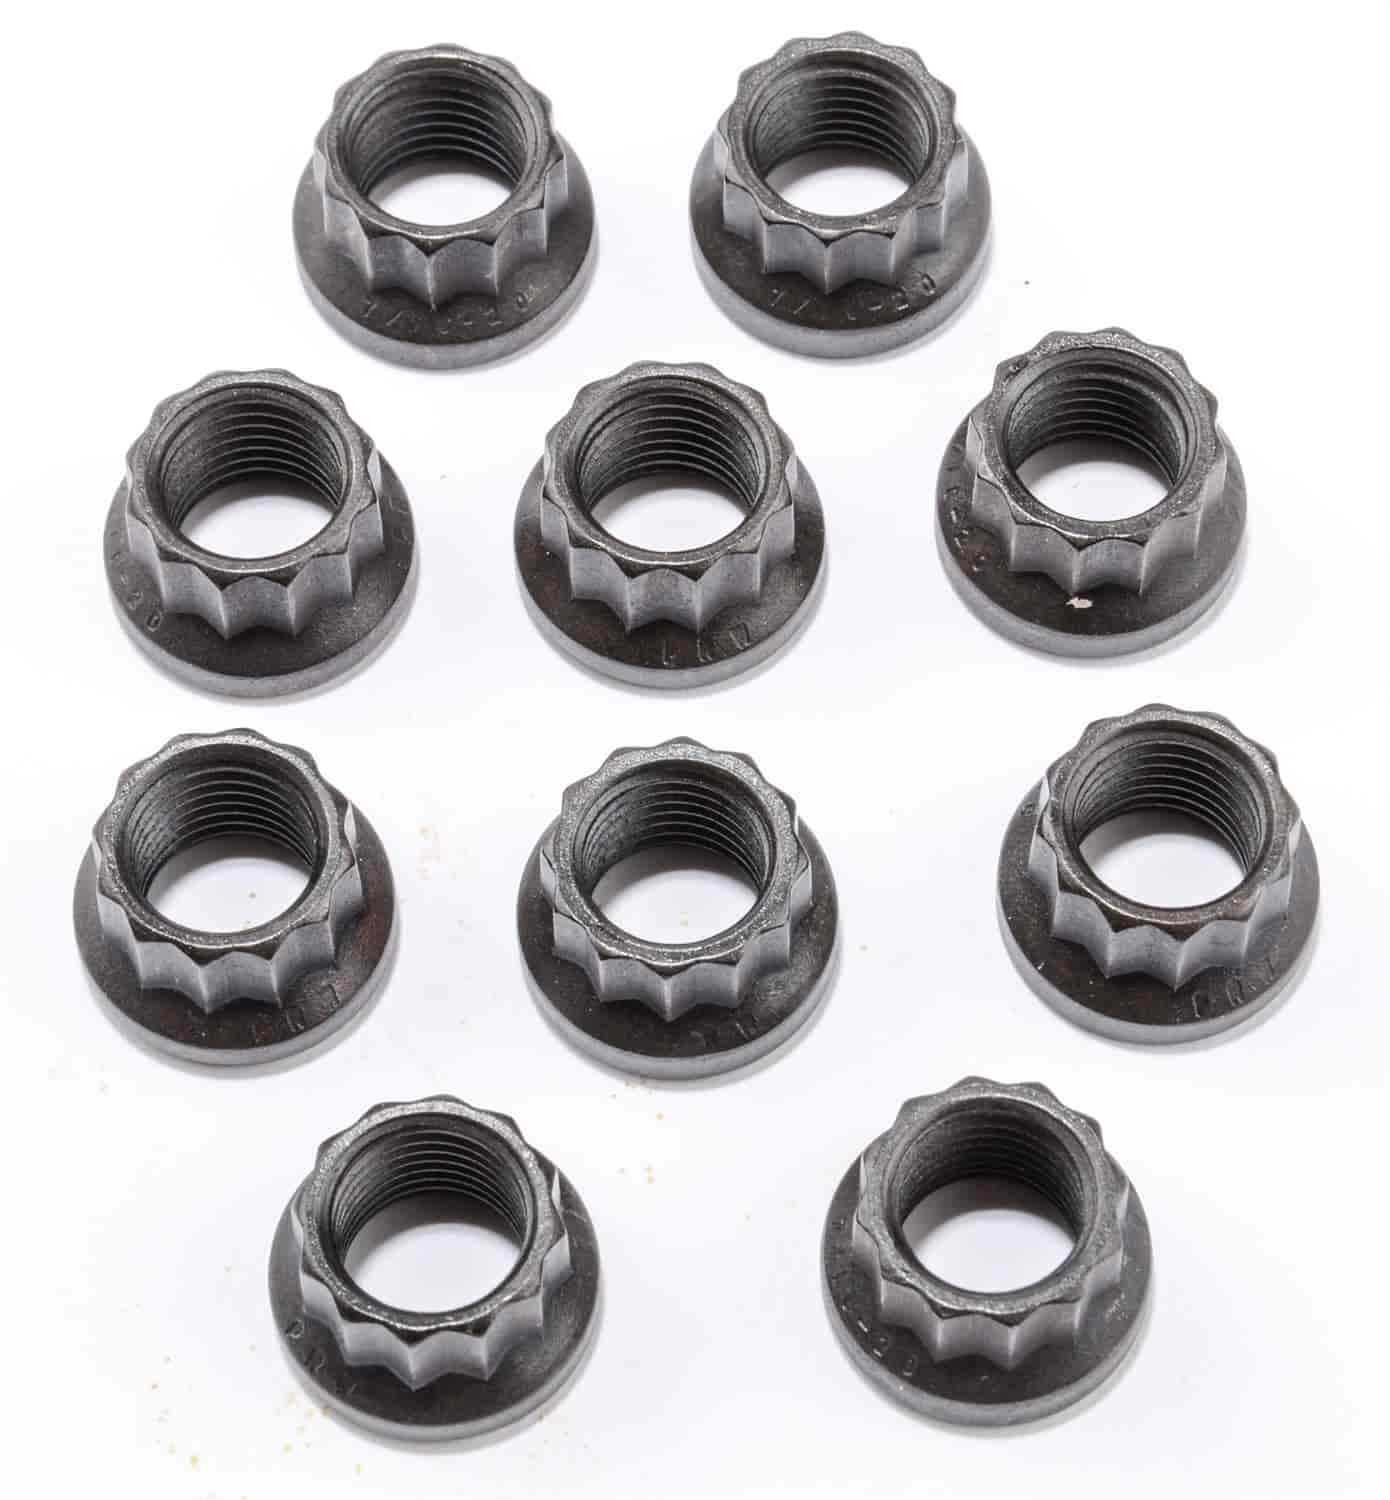 12-Point Flange Nuts 7/16"-20